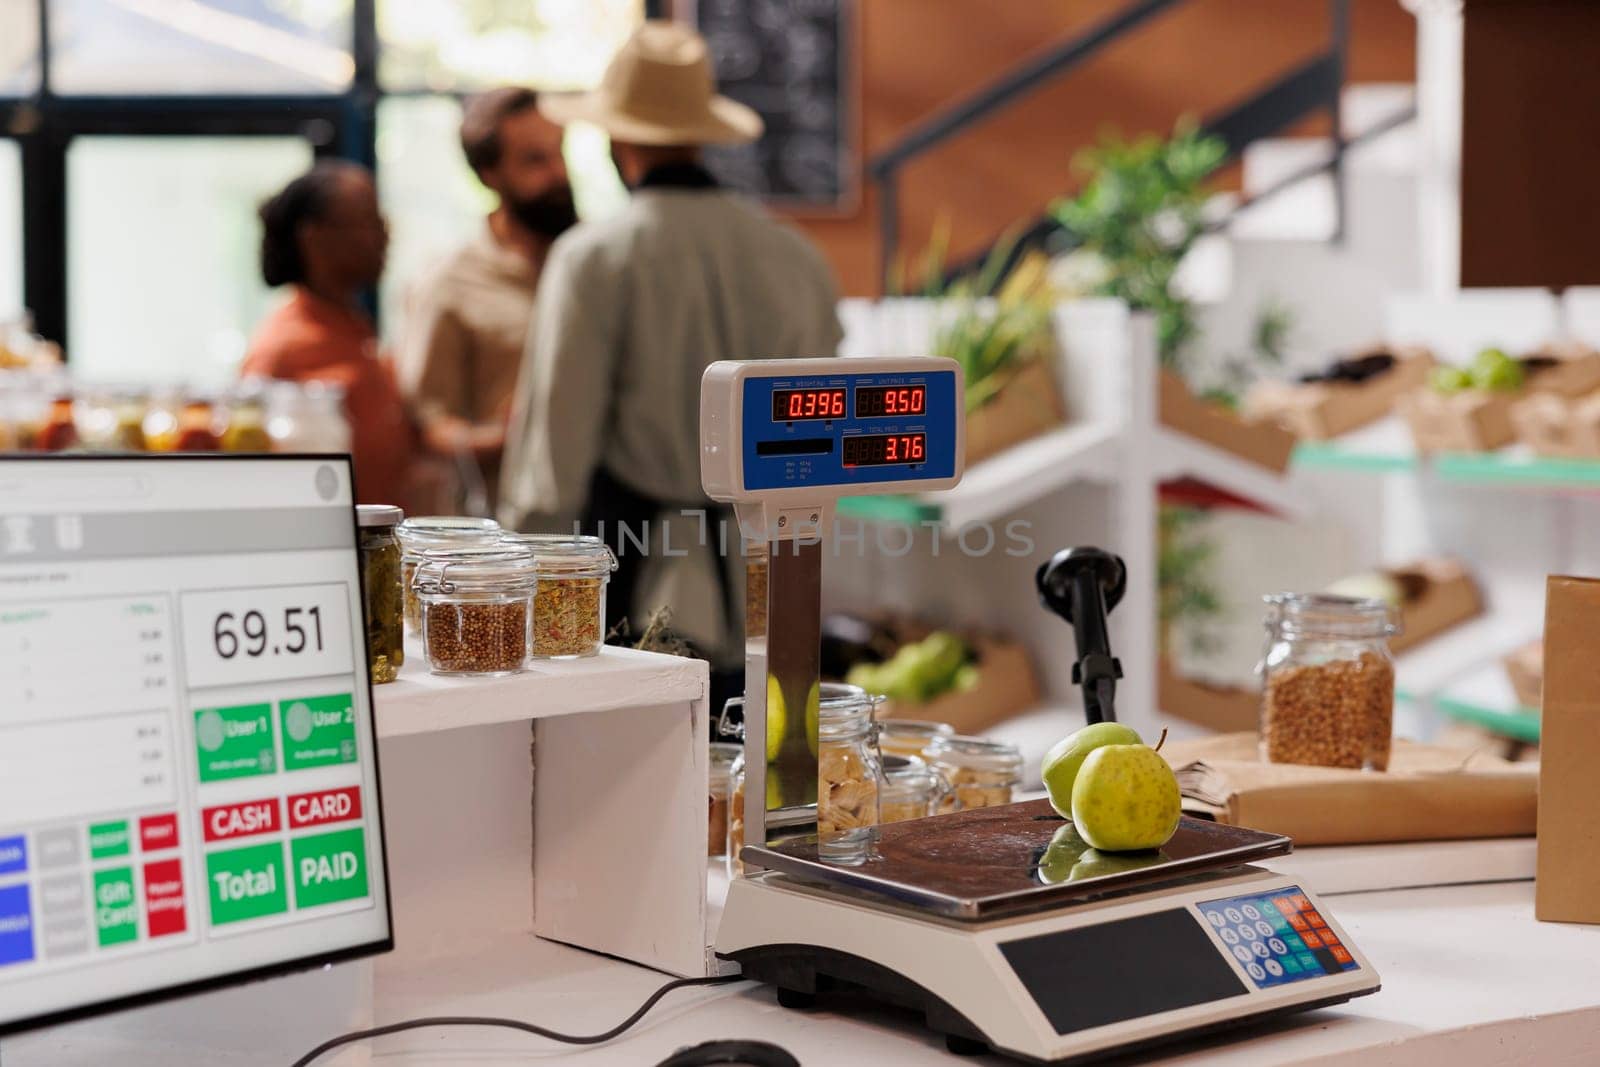 Fresh apples are placed on a digital measuring scale while multicultural customers are assisted by the salesman in background. Photo focus on cashier desk displaying weighing equipment and desktop pc.